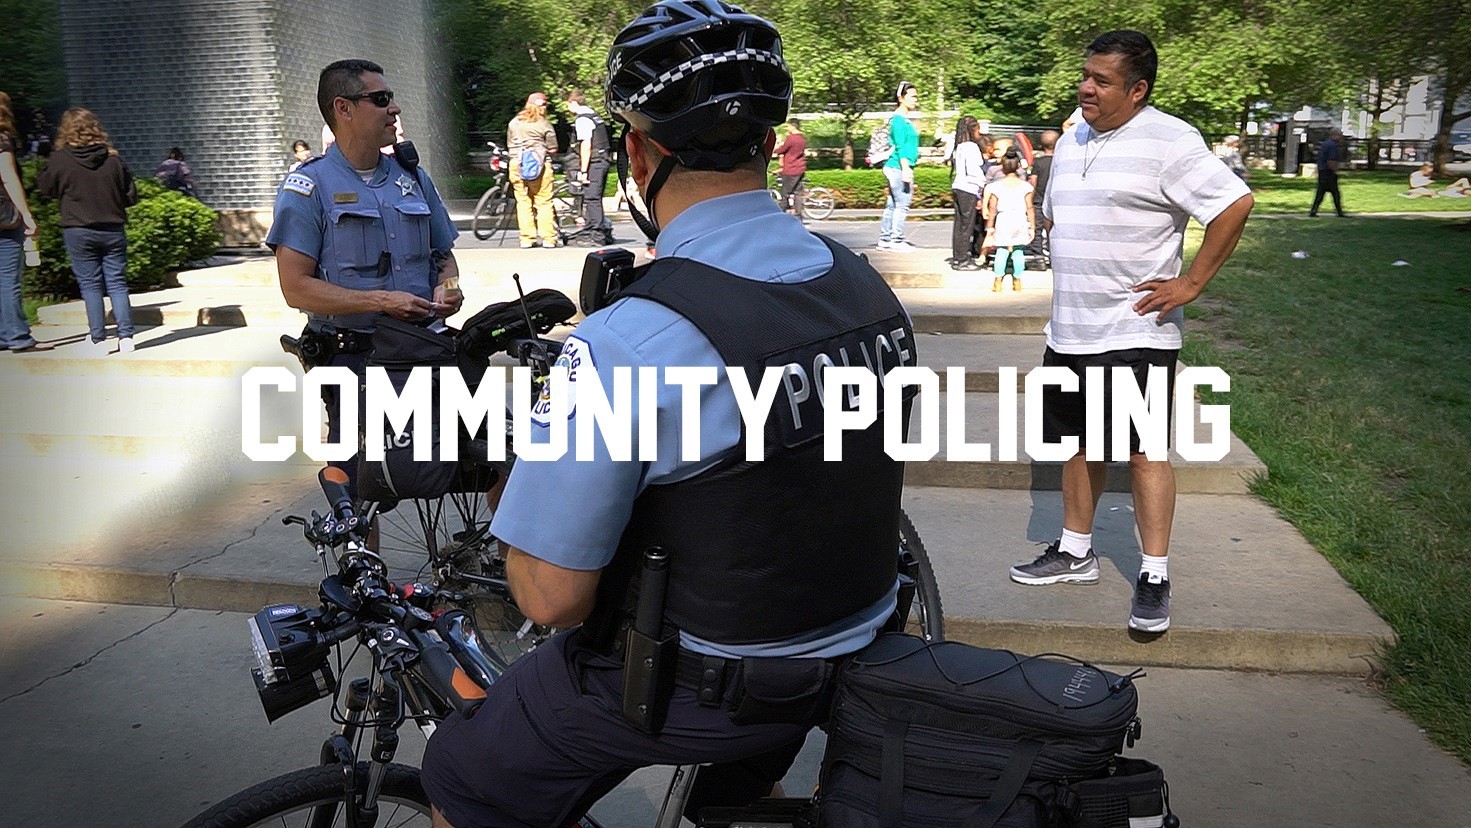 Police department officers providing community policing